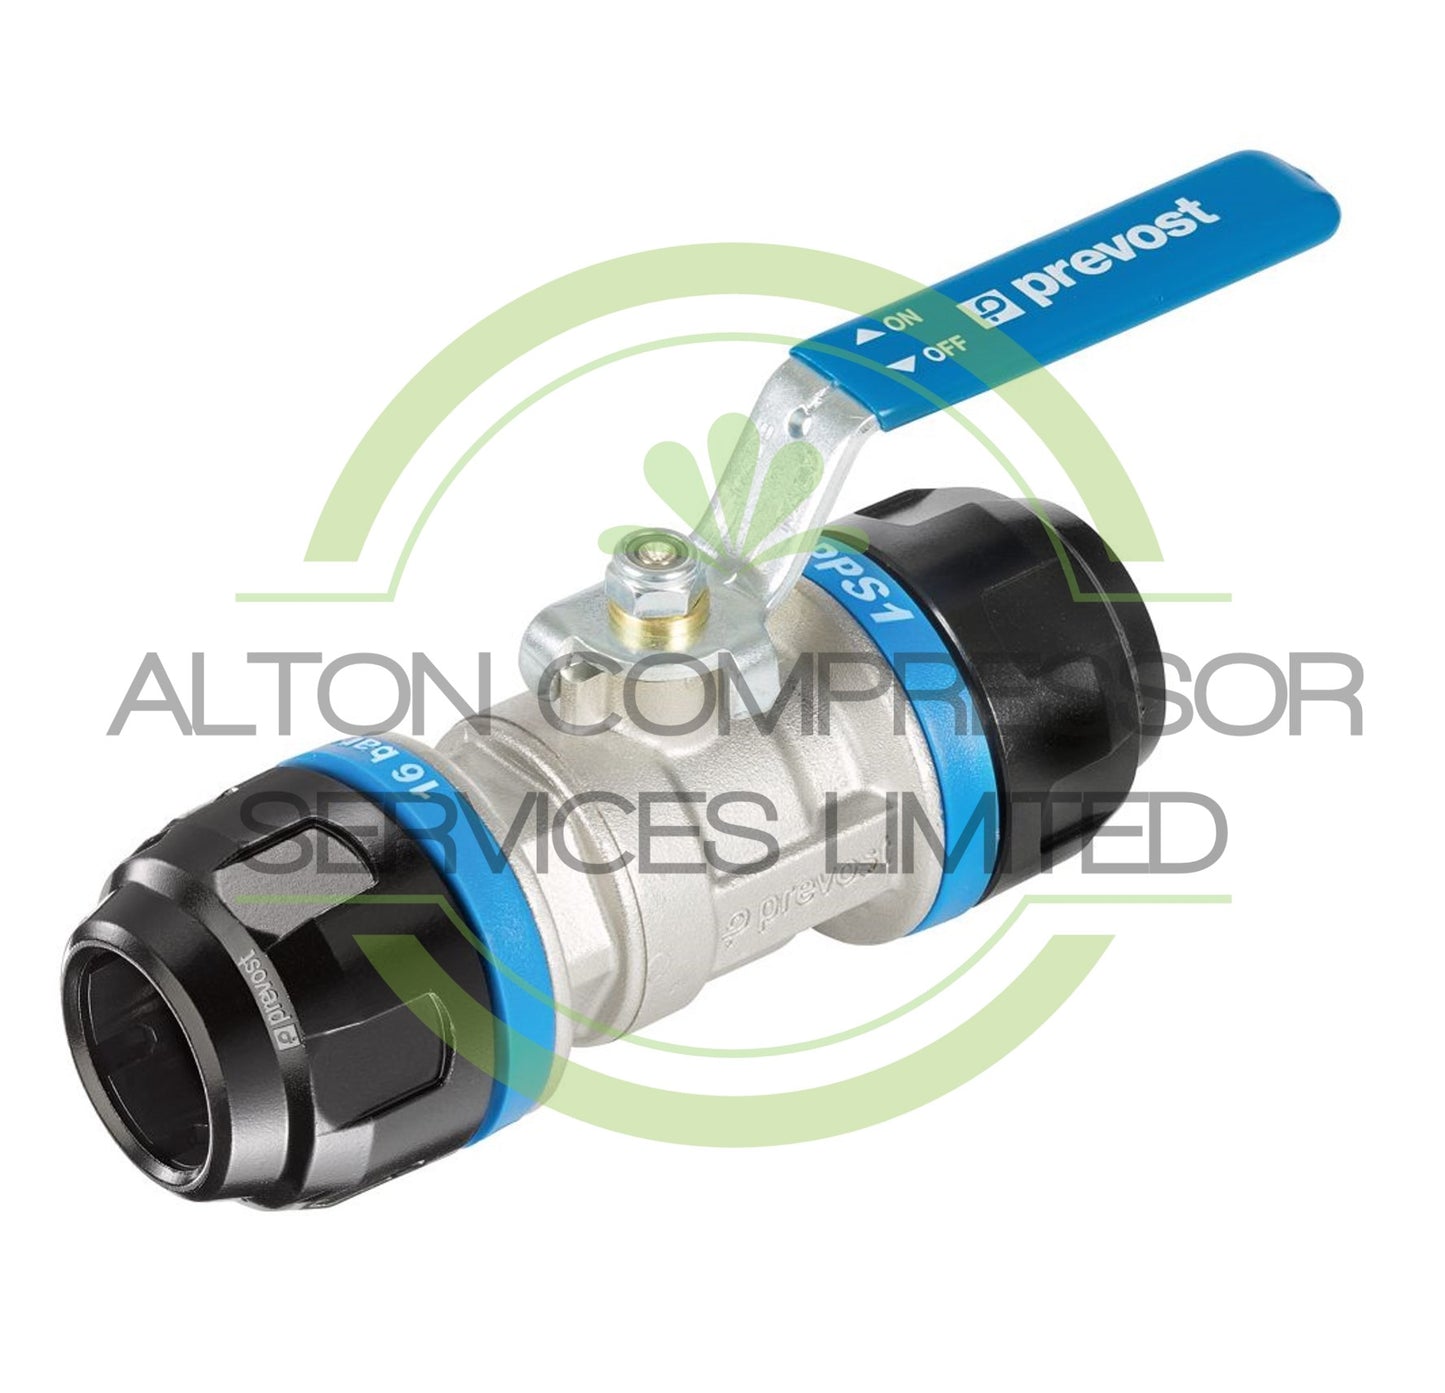 PREVOST Ball Valve Compressed Air Fitting PPS1 RSI